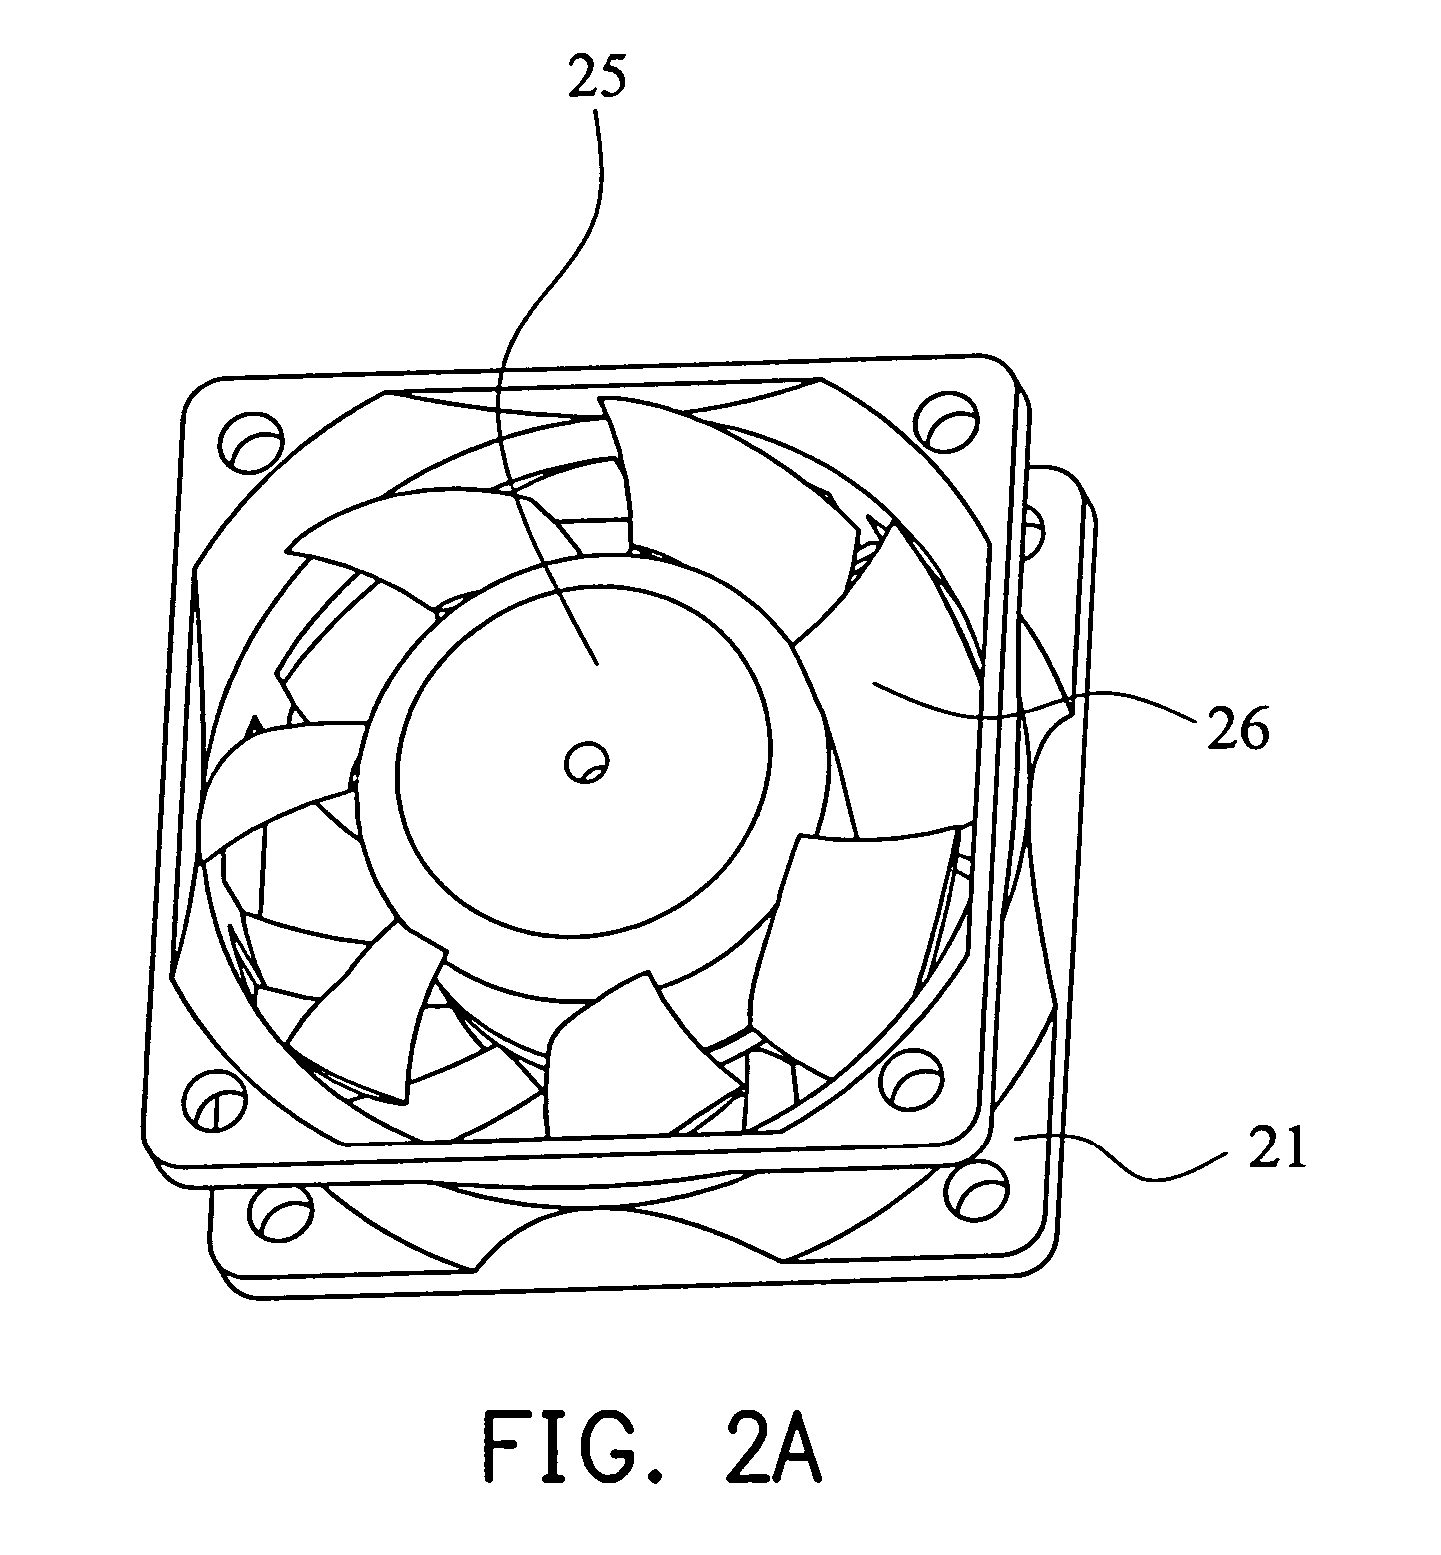 Heat-dissipating device and housing thereof